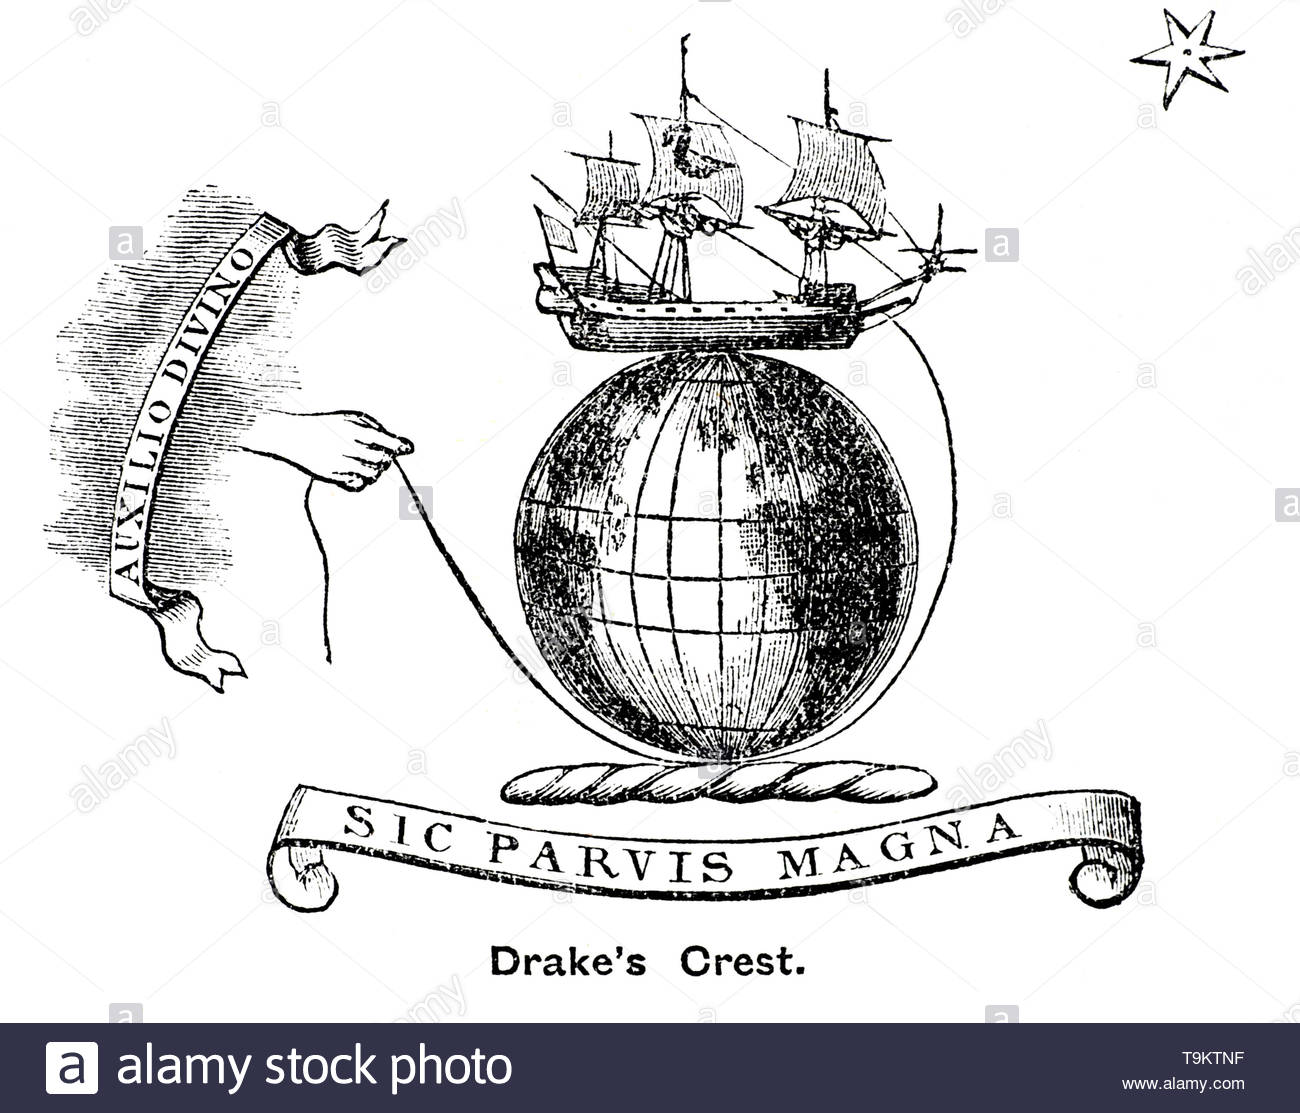 Sir Francis Drake's Crest, vintage illustration from 1884 Stock Photo